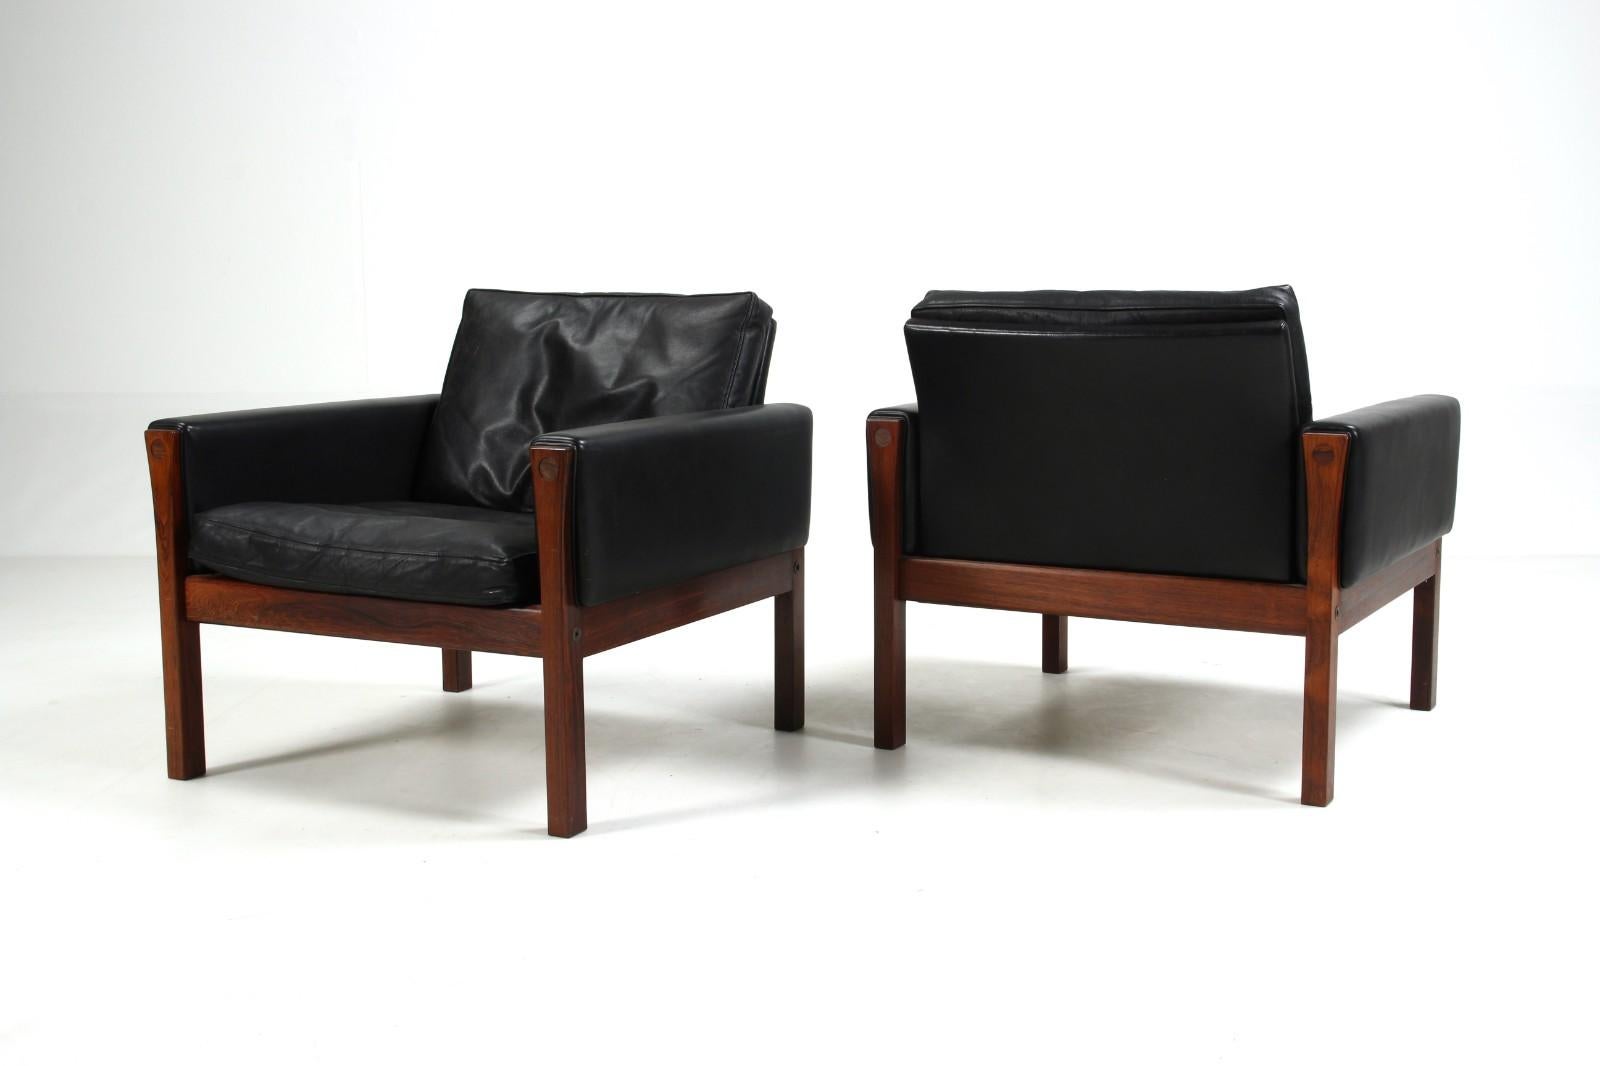 An elegant and sober design by Hans Wegner produced by the Danish manufacturer A.P. Stolen. The clean lines of these armchairs are highlighted by the beautiful rosewood structure and make this model an armchair with vintage charm, but also very